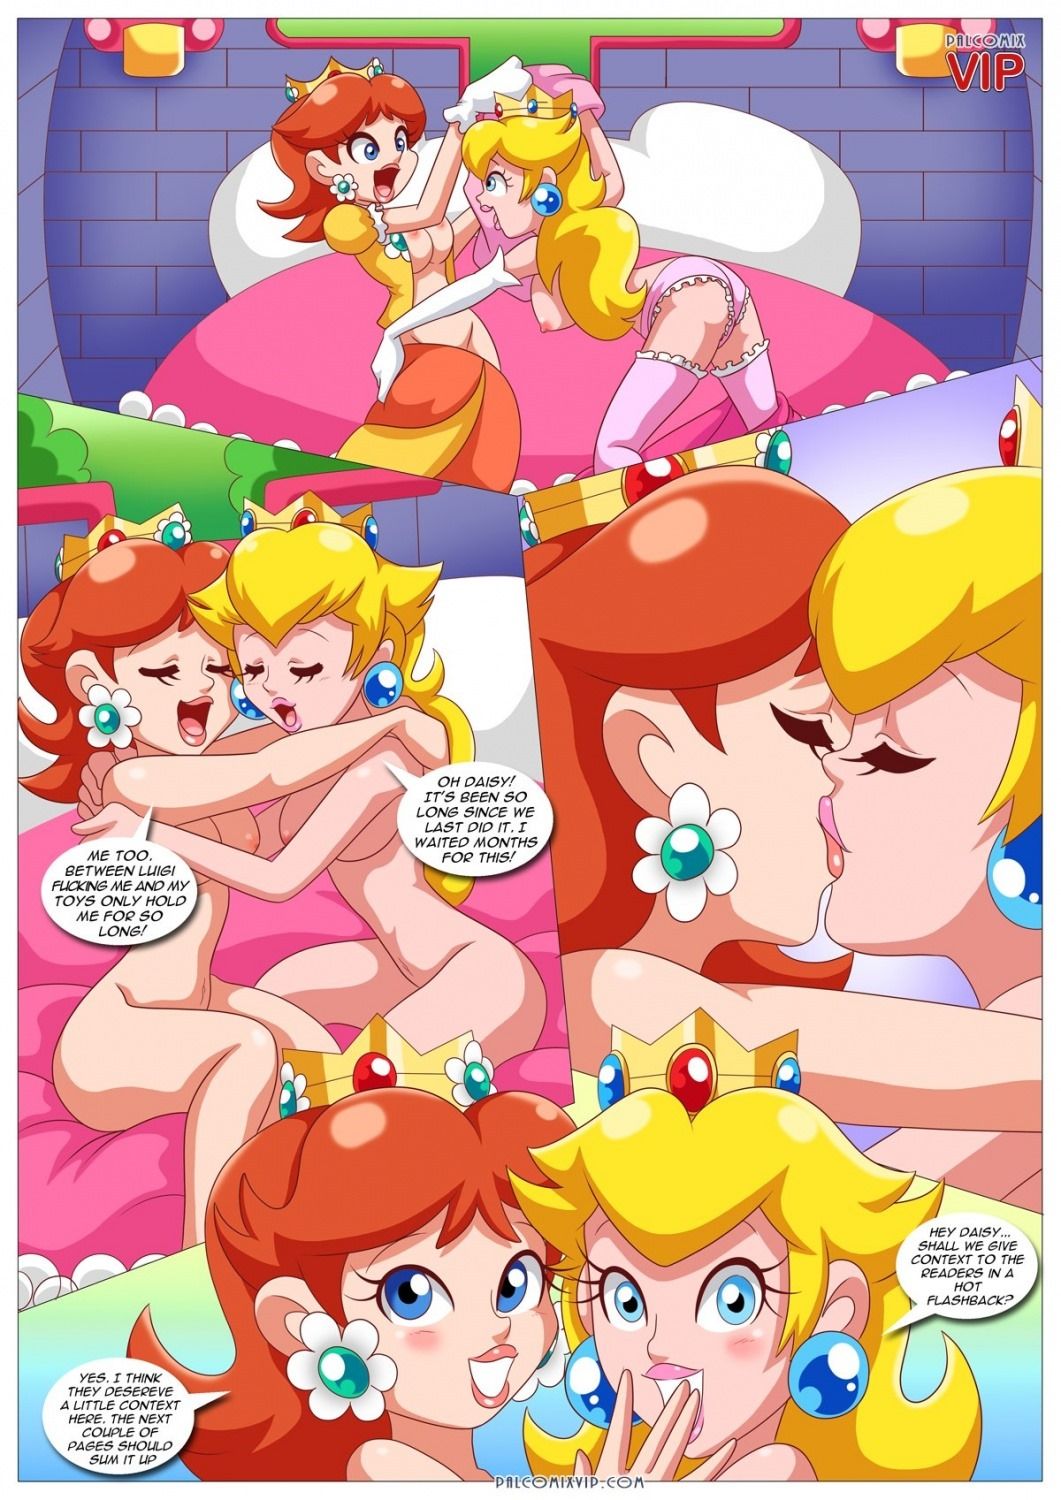 [Palcomix] When the Bros are Away, Mario page 3